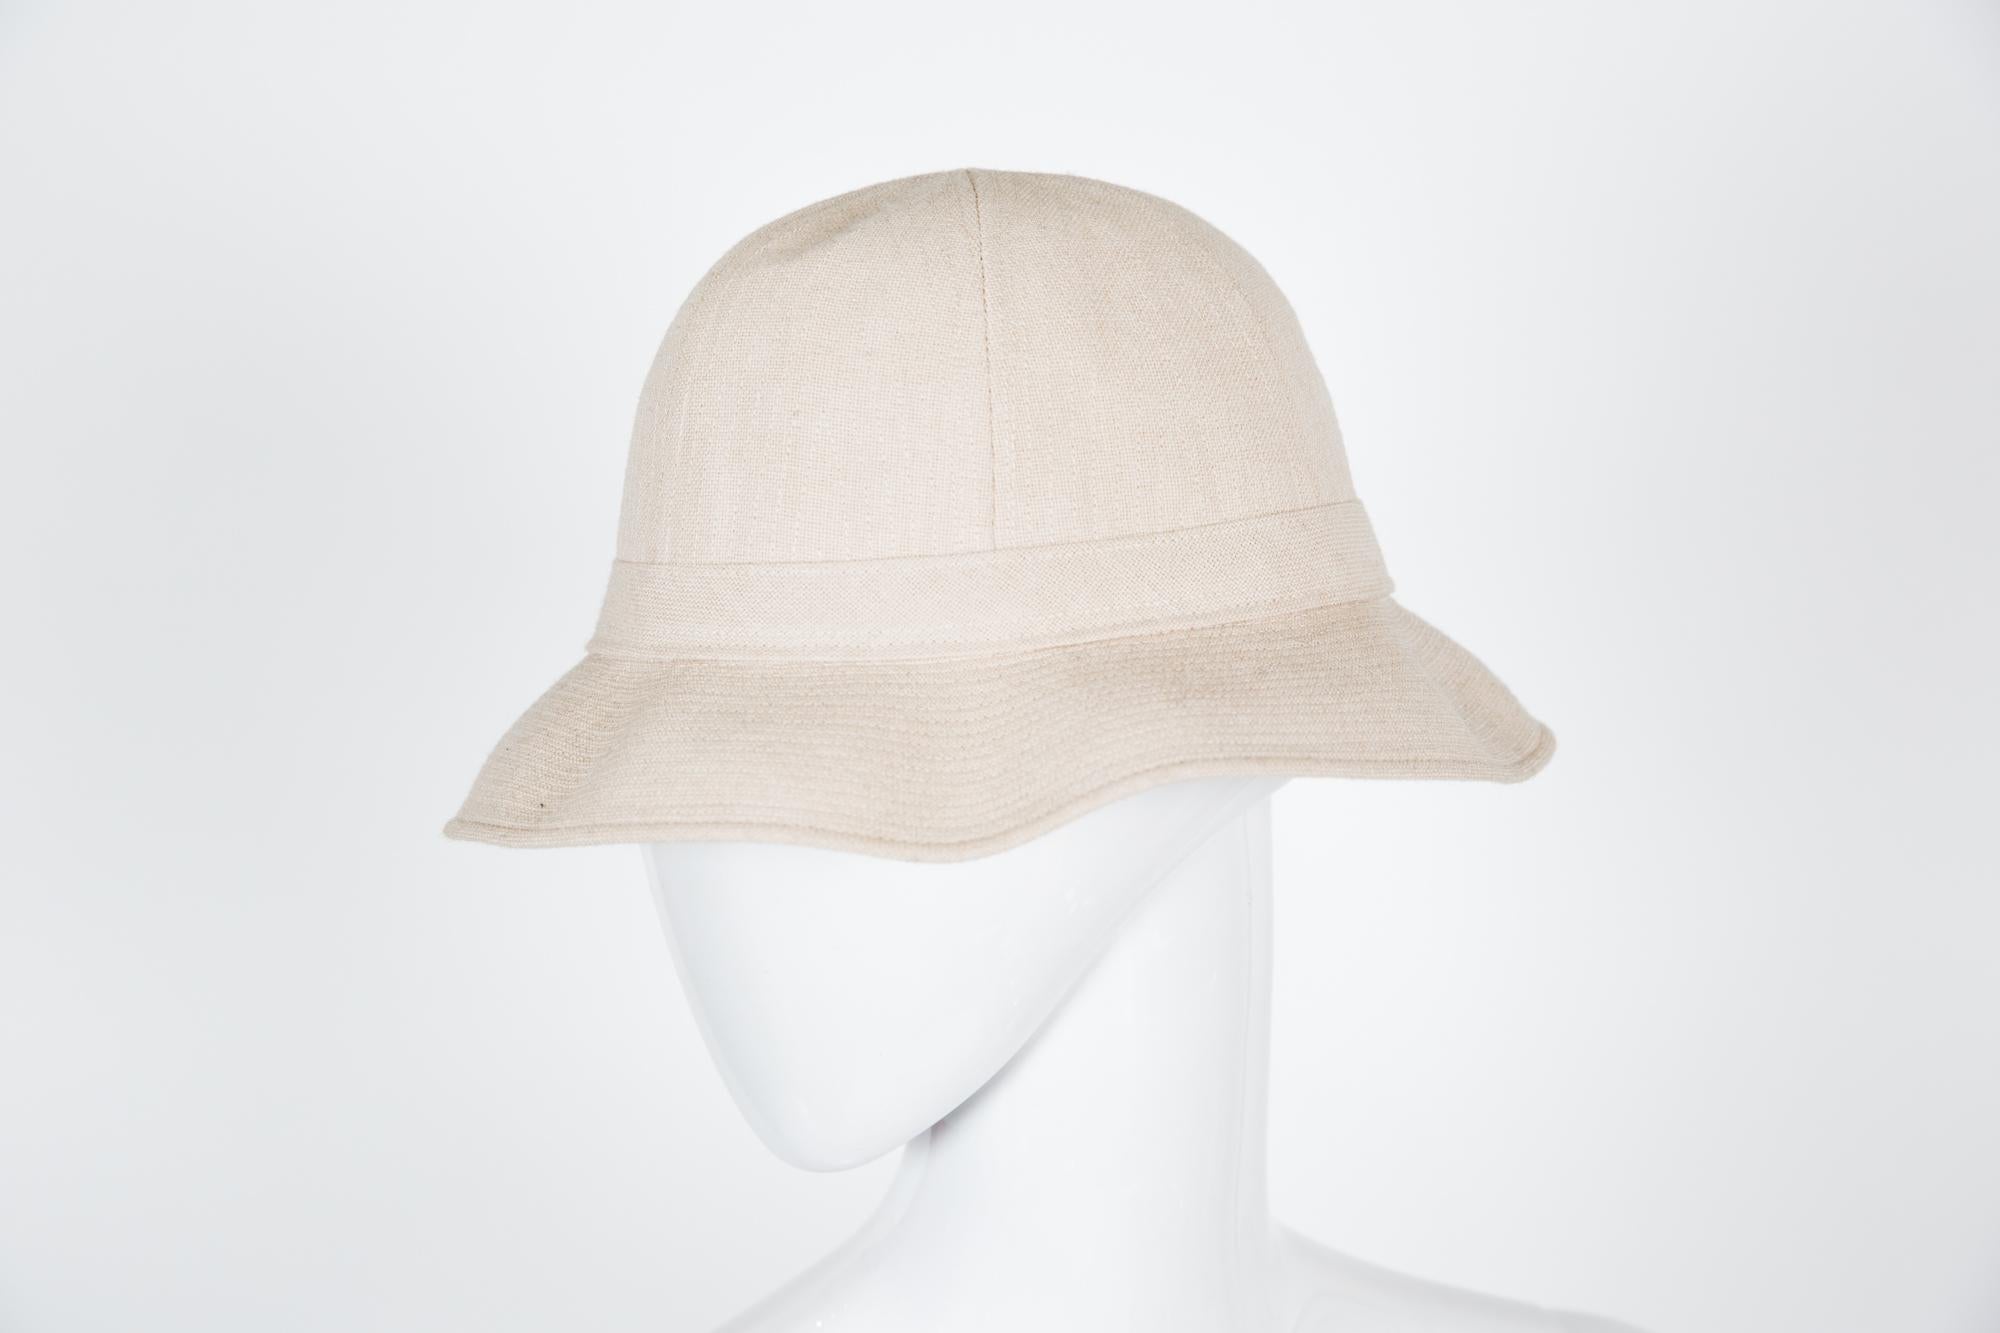 Hermes Motsch Paris (Hermès artisan maker) summer ivory cotton canvas bucket hat. 
Size: 55 
Borders: 6cm
In good vintage condition. Made in France.
We guarantee you will receive this gorgeous summer hat as described and showed on photos.